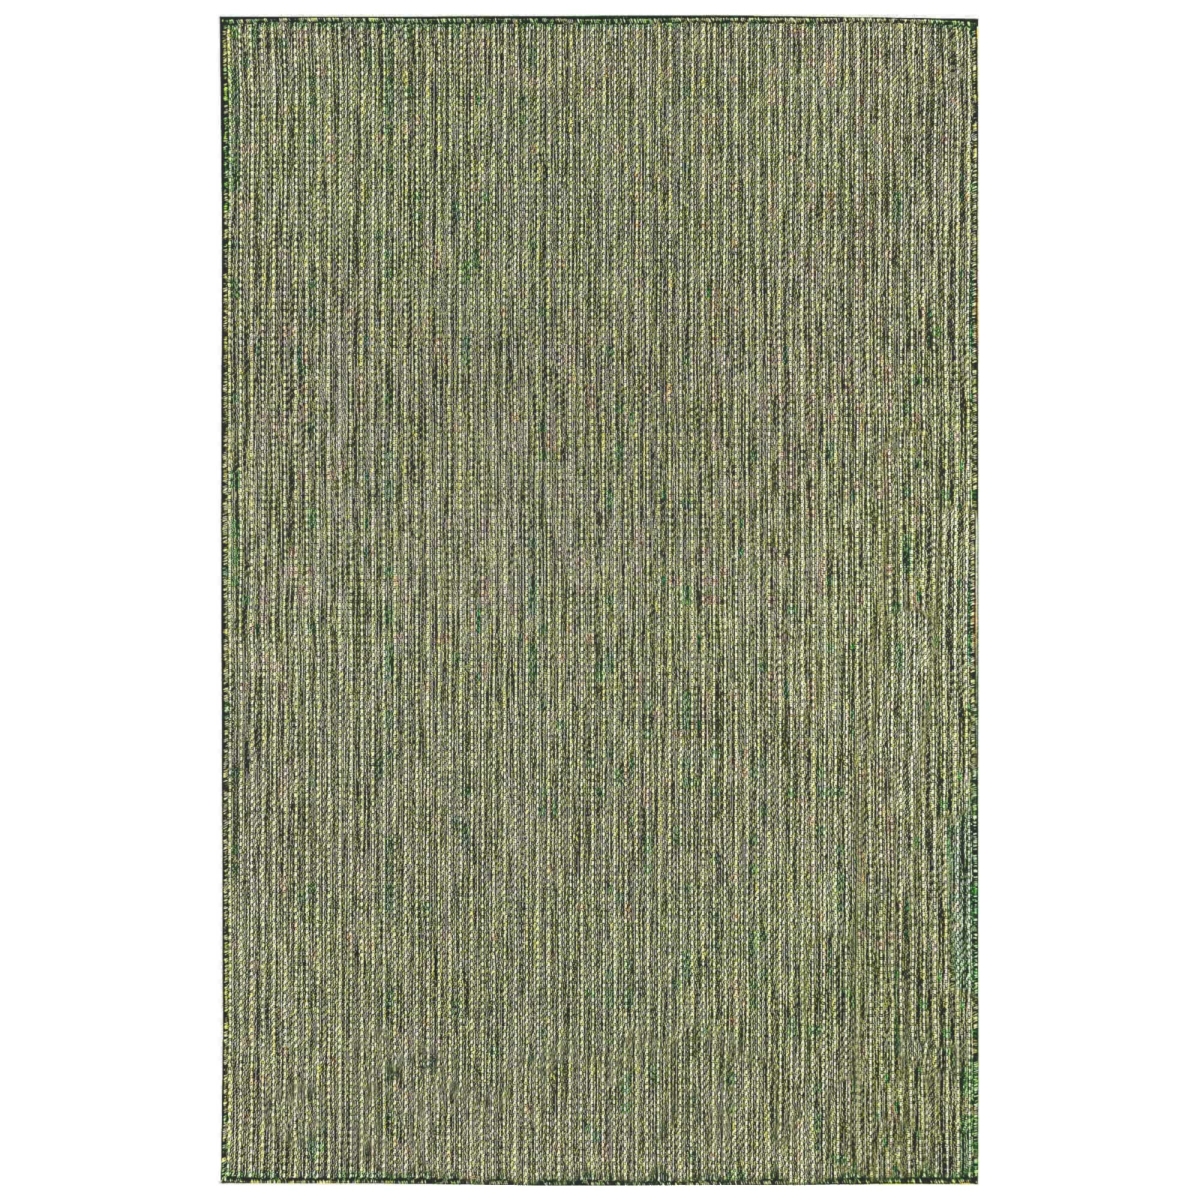 Trans-ocean Imports Cre58842206 4 Ft. 10 In. X 7 Ft. 6 In. Liora Manne Carmel Texture Stripe Indoor & Outdoor Wilton Woven Rectangle Rug - Green